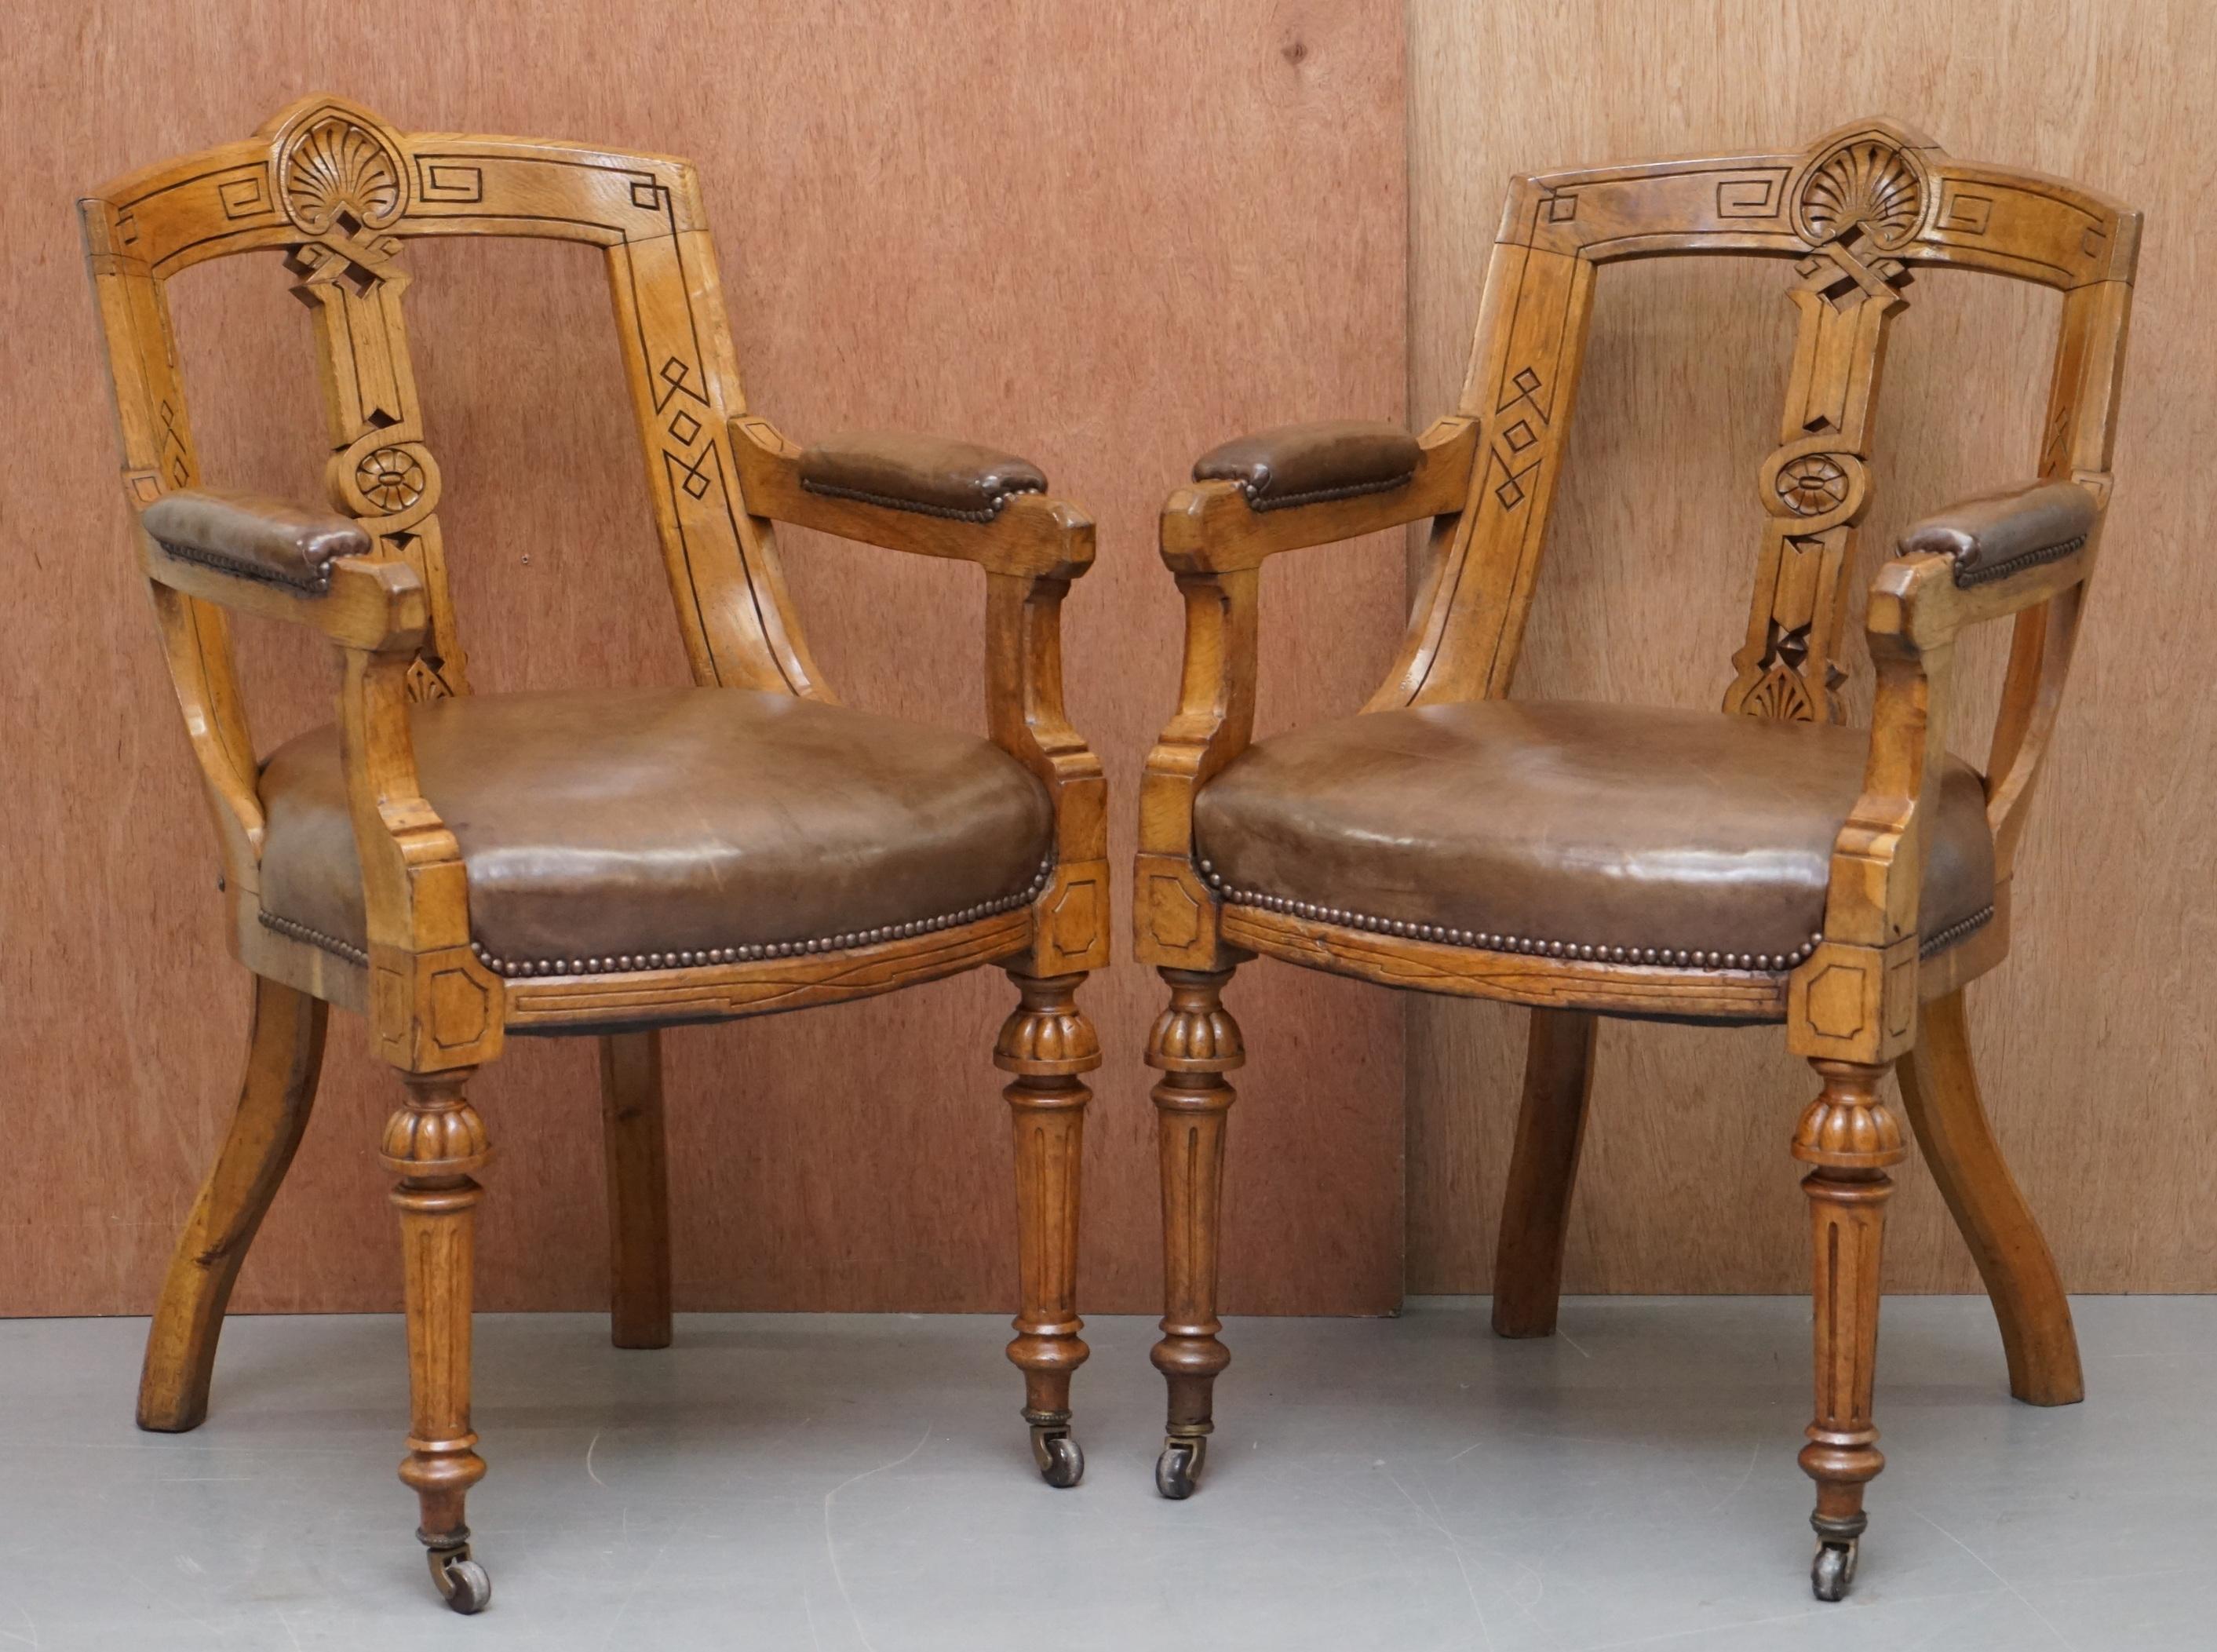 We are delighted to offer for sale this sublime suite of eight original Victorian spoon back pollard oak dining chairs 

These are a very well made set, the frames are ornately carved all over and finished with porcelain castors. The seats are